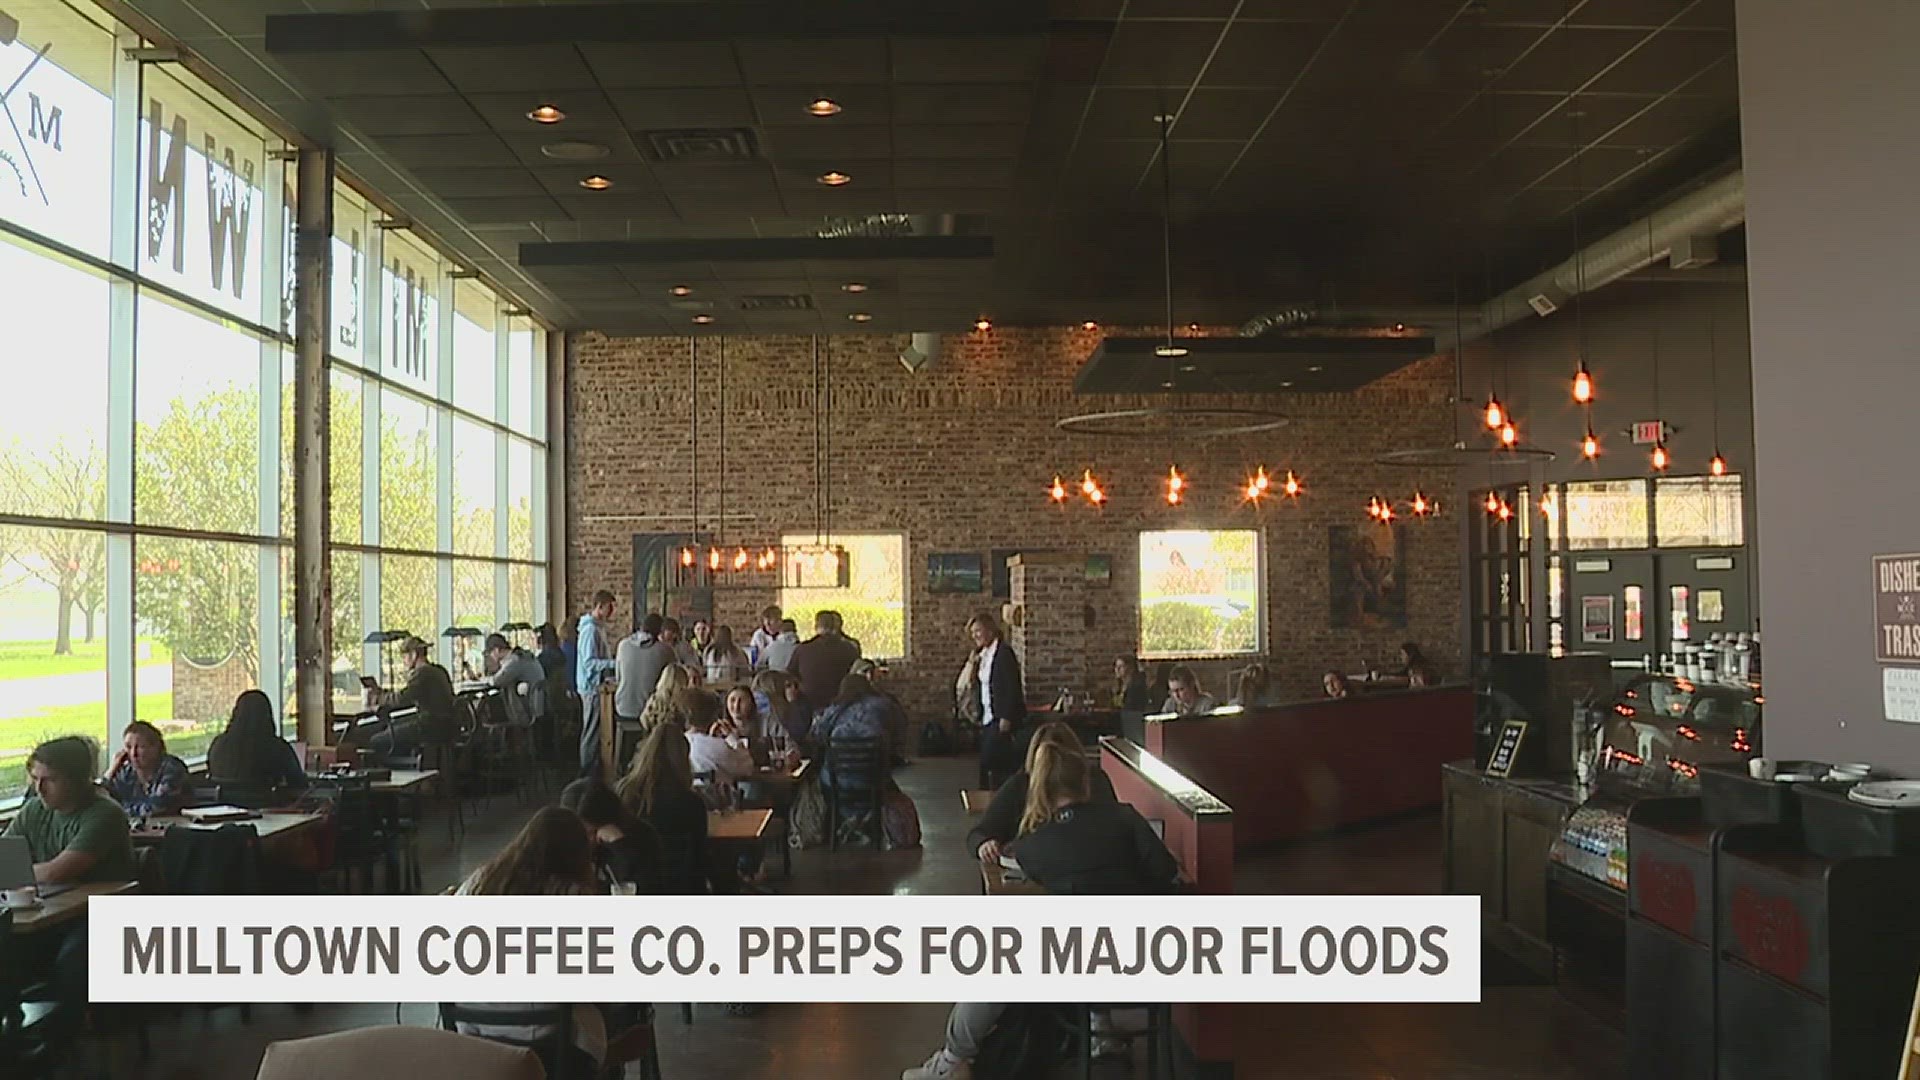 After being forced to close three times due to the historic flood of 2019, Milltown Coffee Co. now faces a similar threat as the Mississippi River is rising.